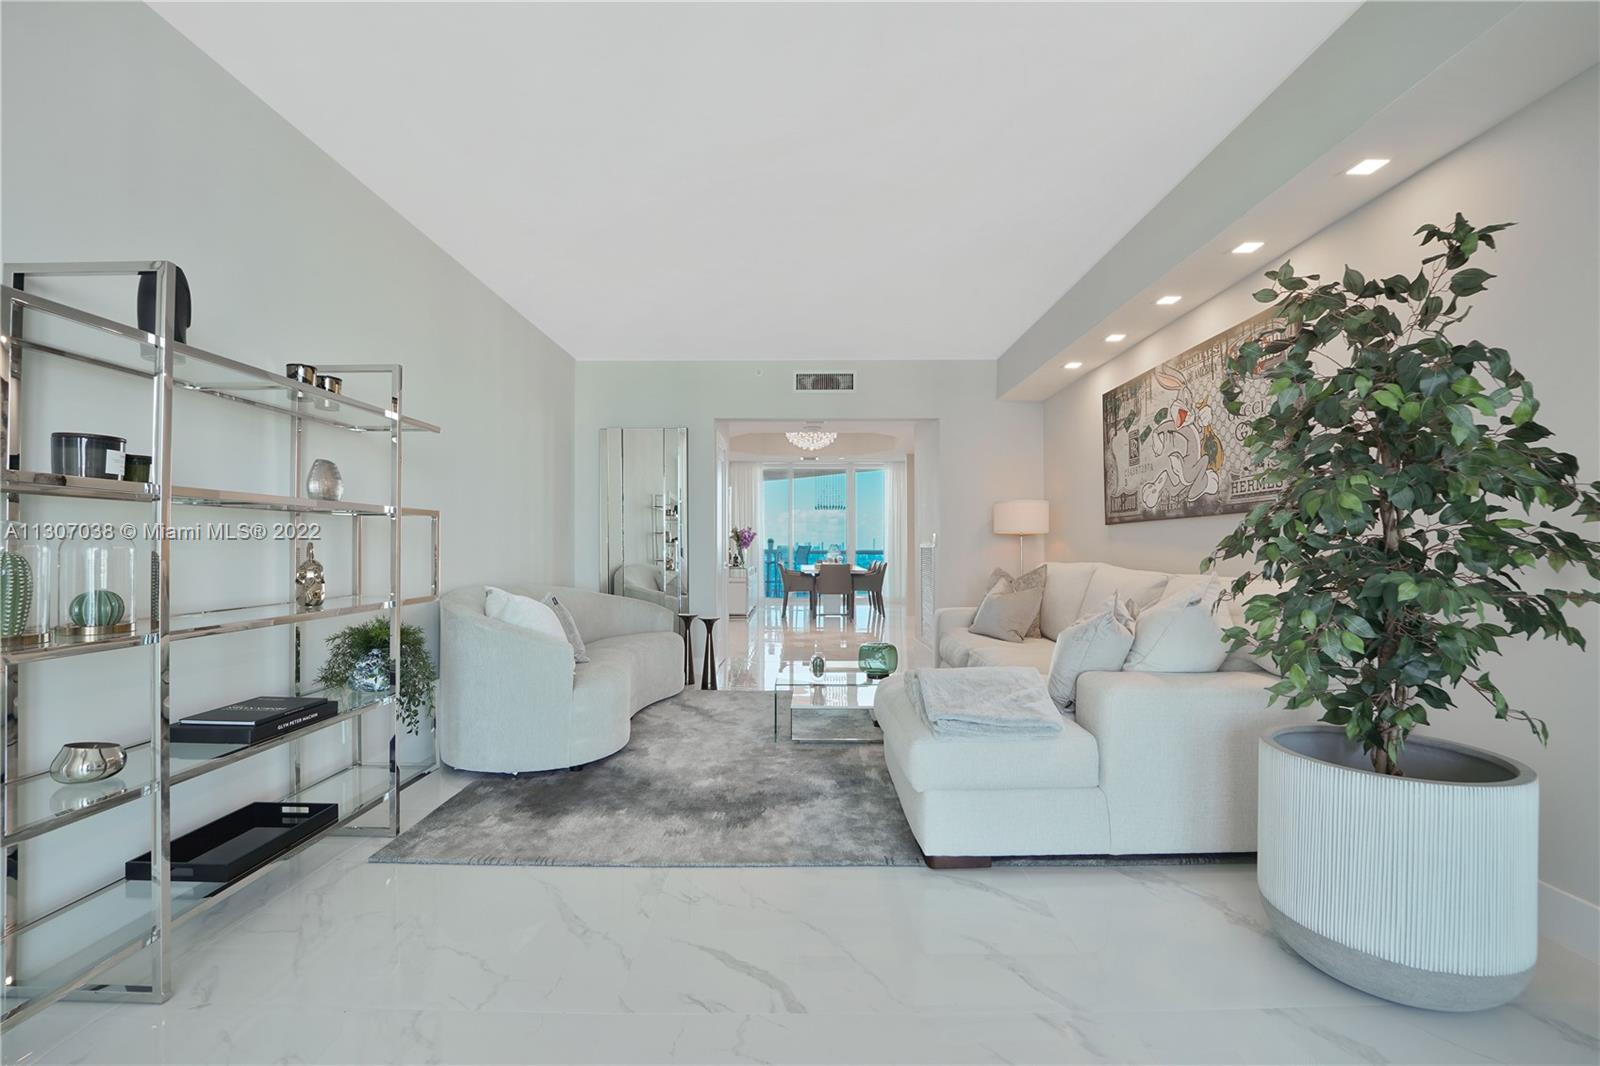 300 S Pointe Dr 4306, Miami Beach, Florida 33139, 3 Bedrooms Bedrooms, ,3 BathroomsBathrooms,Residential,For Sale,300 S Pointe Dr 4306,A11307038